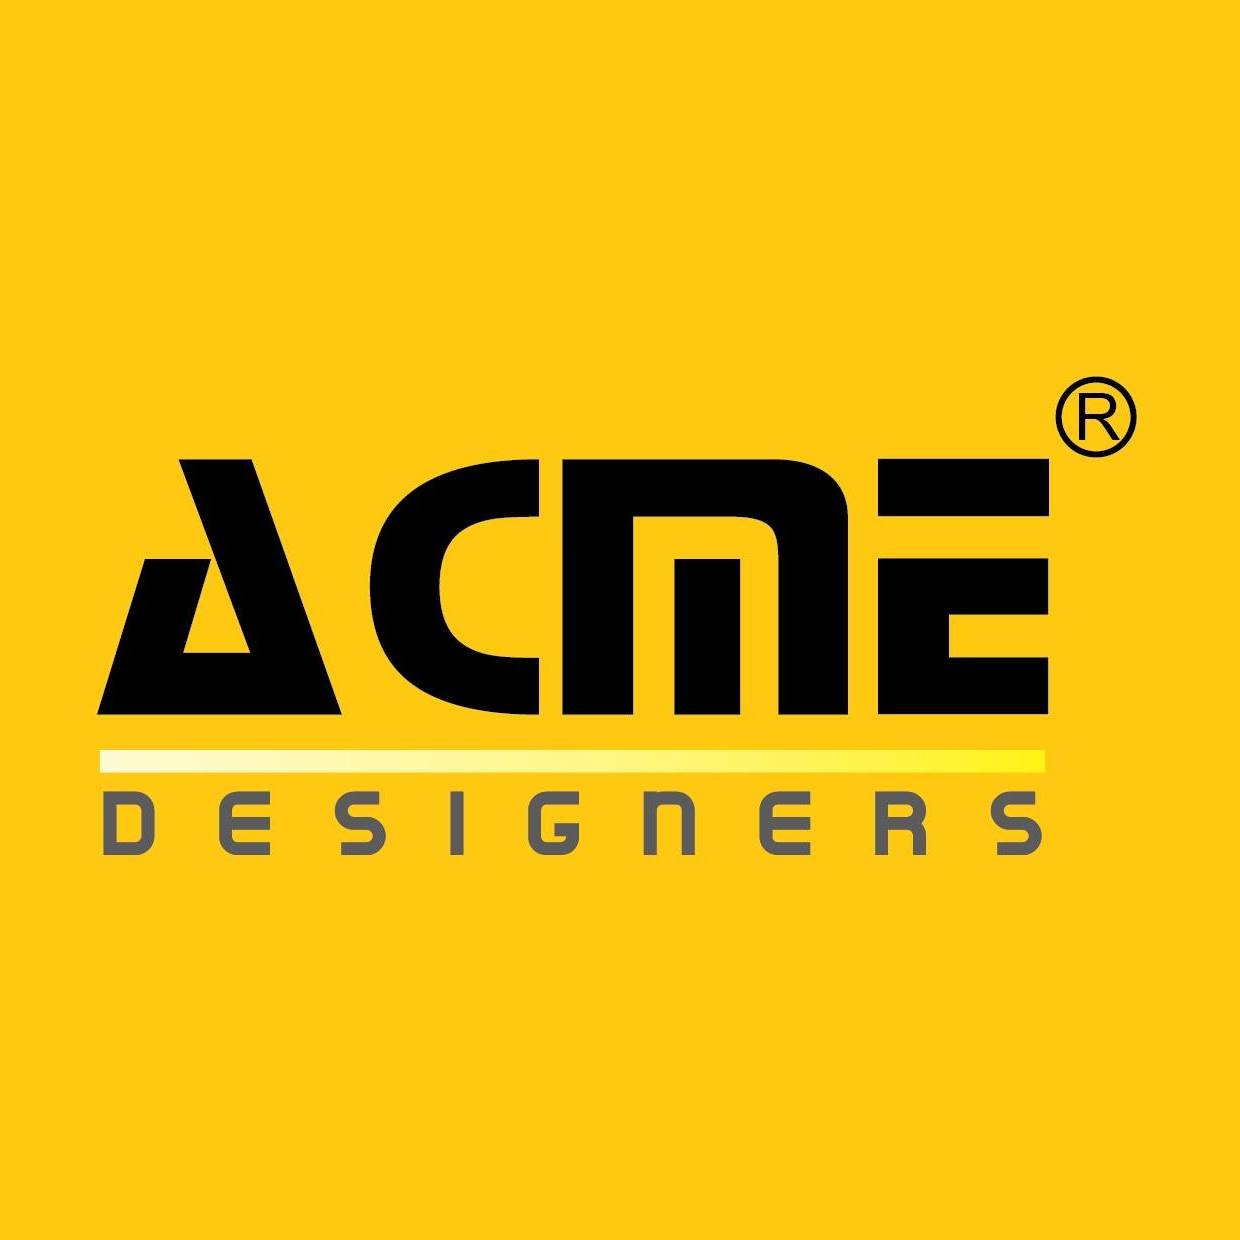 Acme Designers|Accounting Services|Professional Services